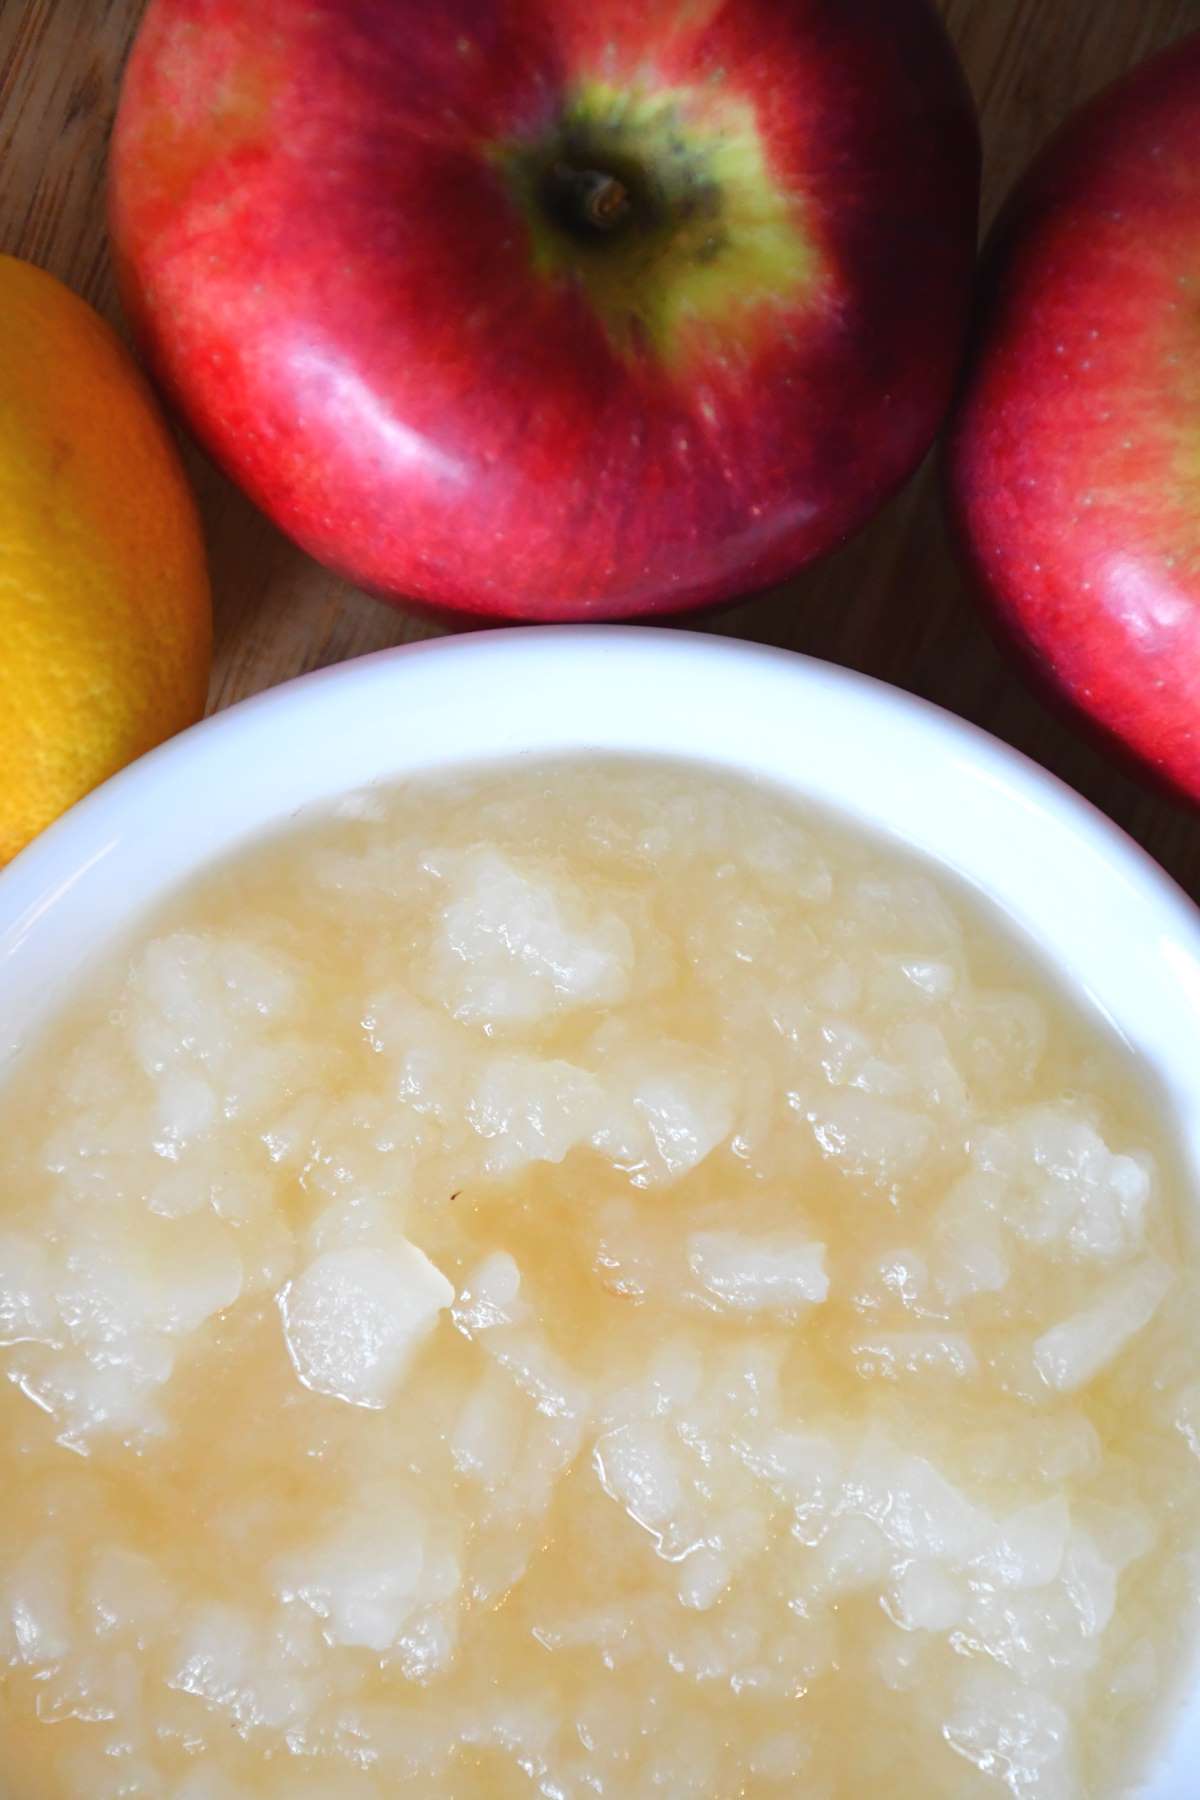 Delicious unsweetened applesauce made with fresh apples and lemon juice.